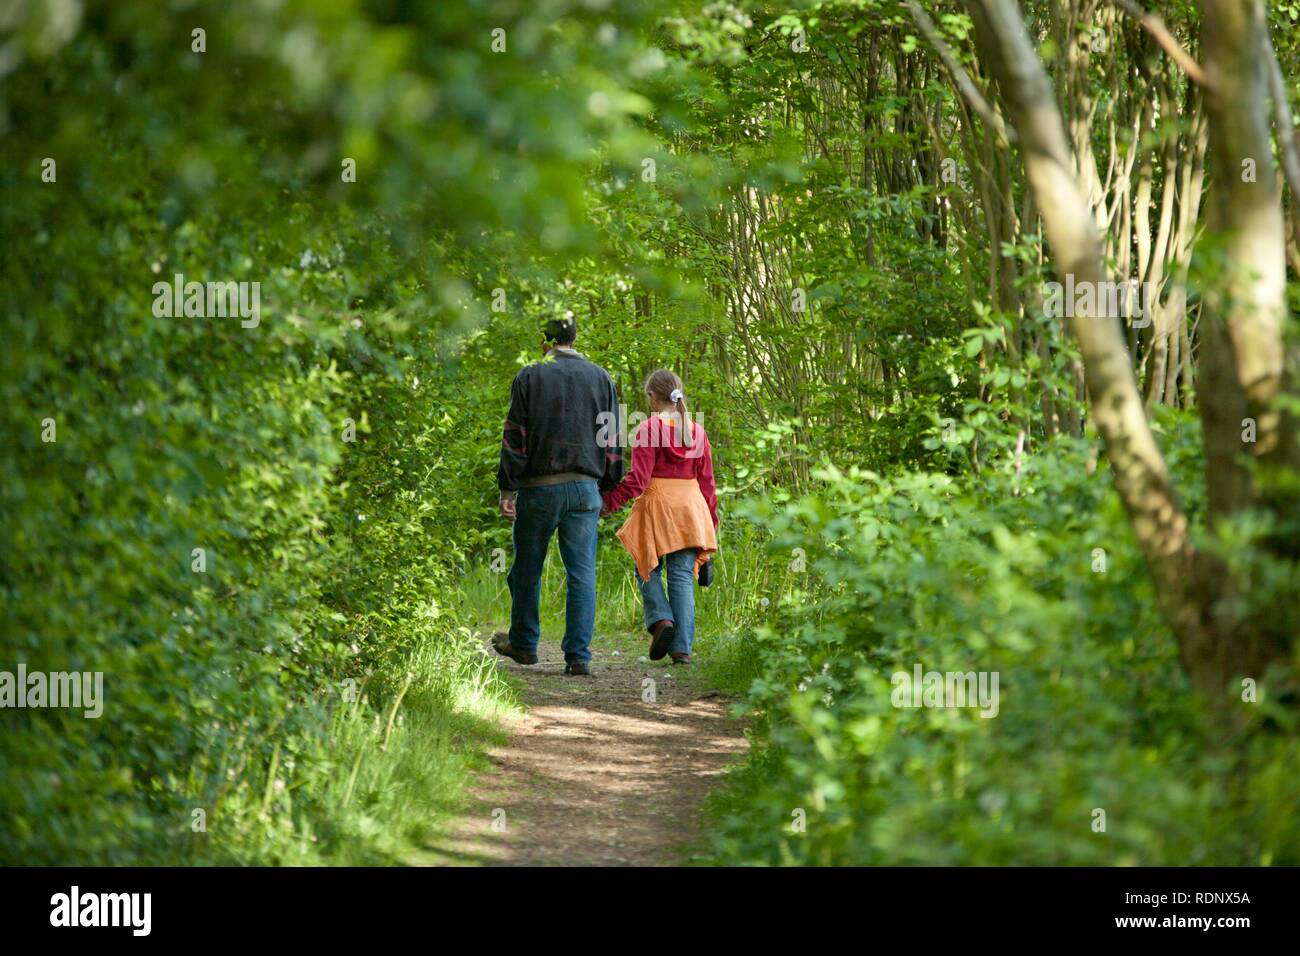 Man walking with a little girl into the woods, posed scene Stock Photo